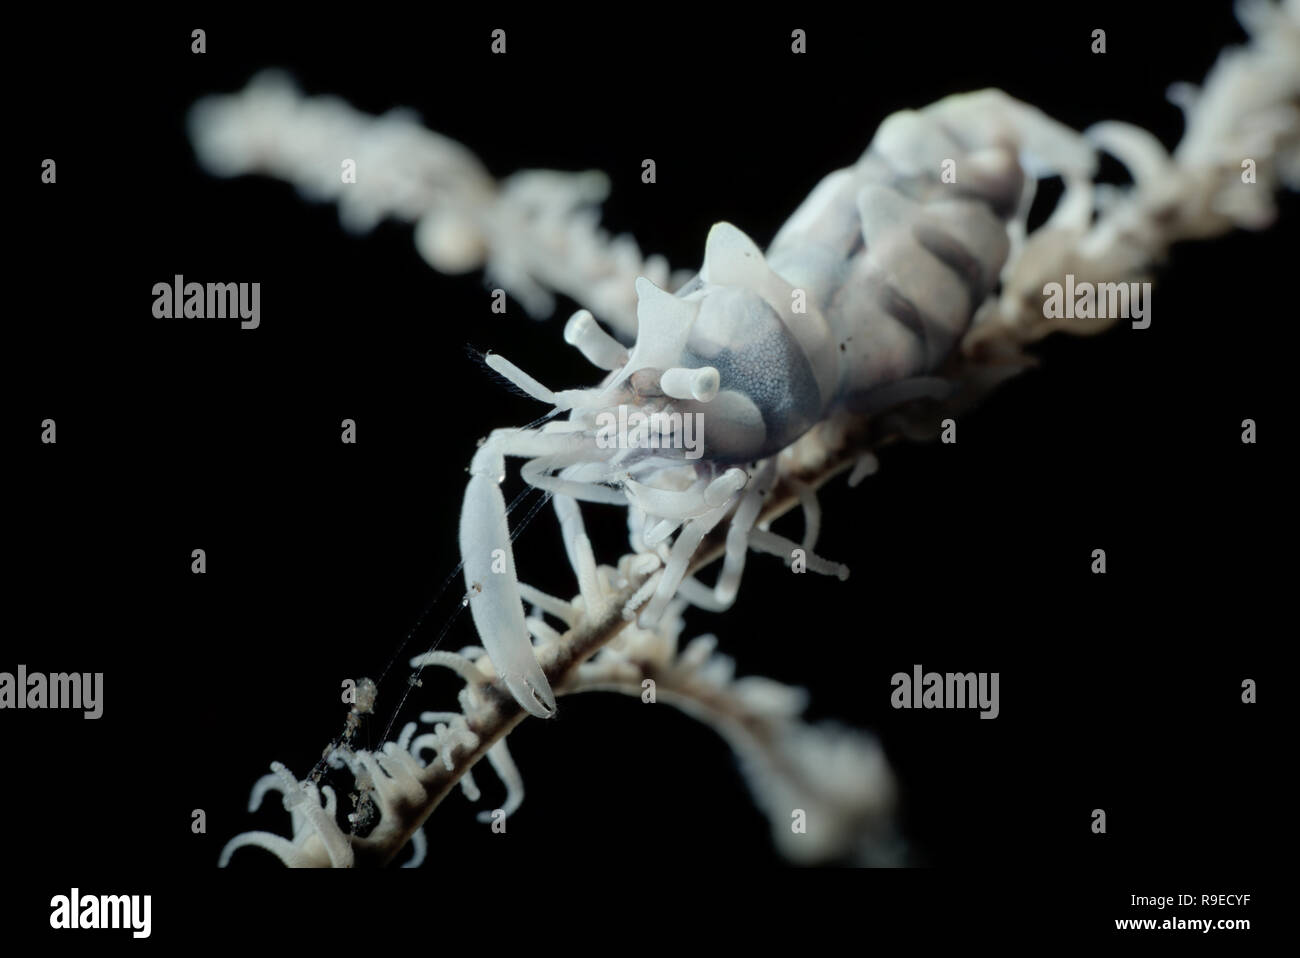 Shrimp on a black coral in the Bali Sea, Indonesia Stock Photo